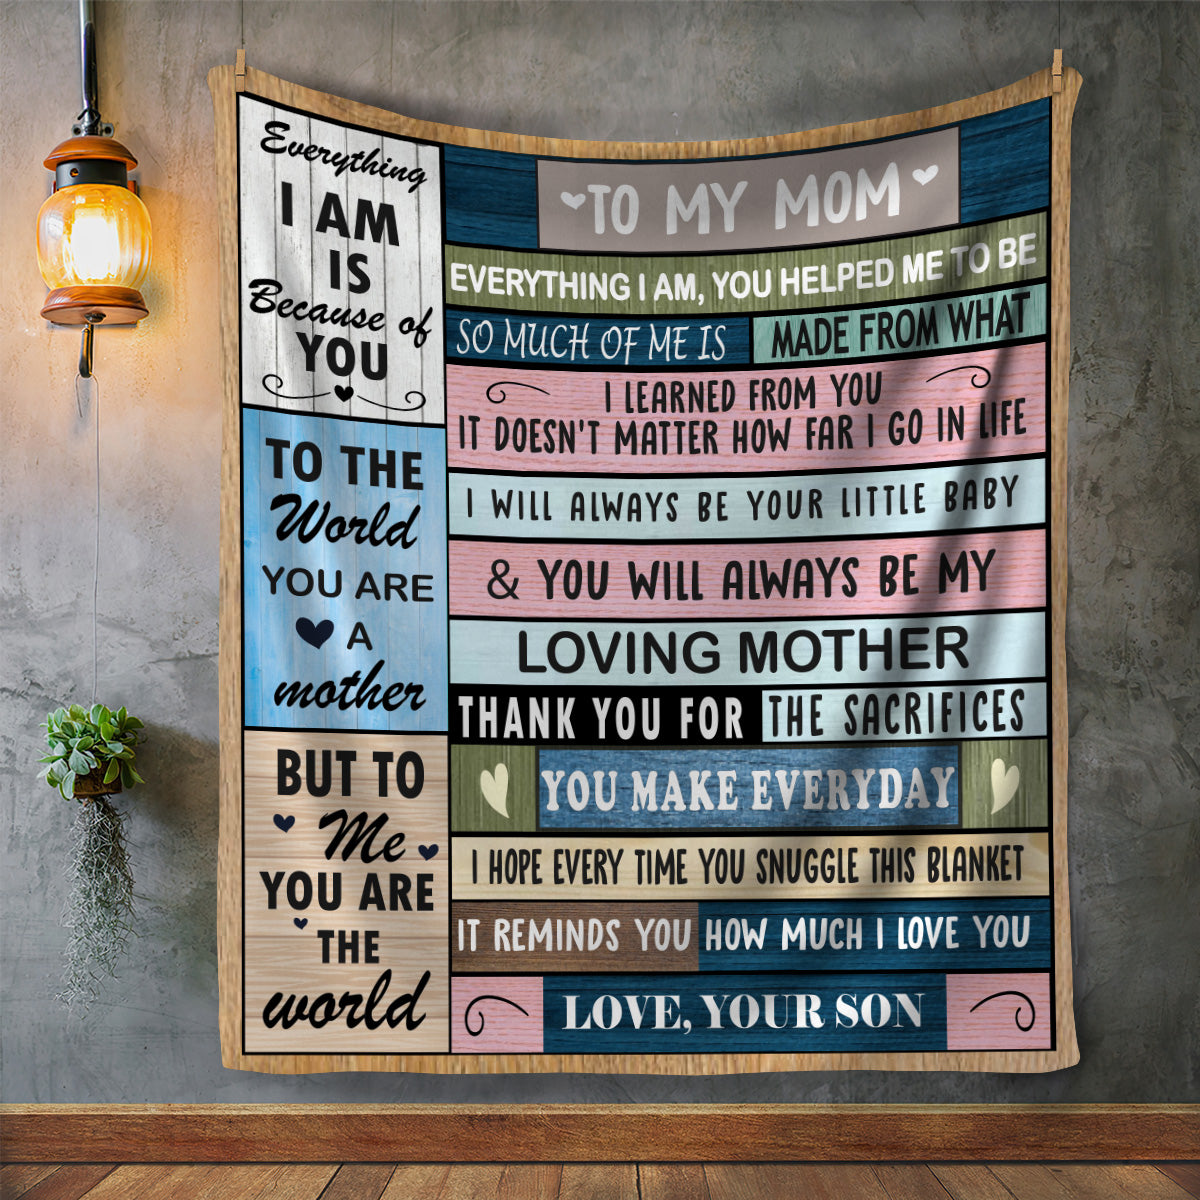 To My Mom - You Are The World Blanket - Birthday, Loving Gift for Mom, Mother's Day Gift